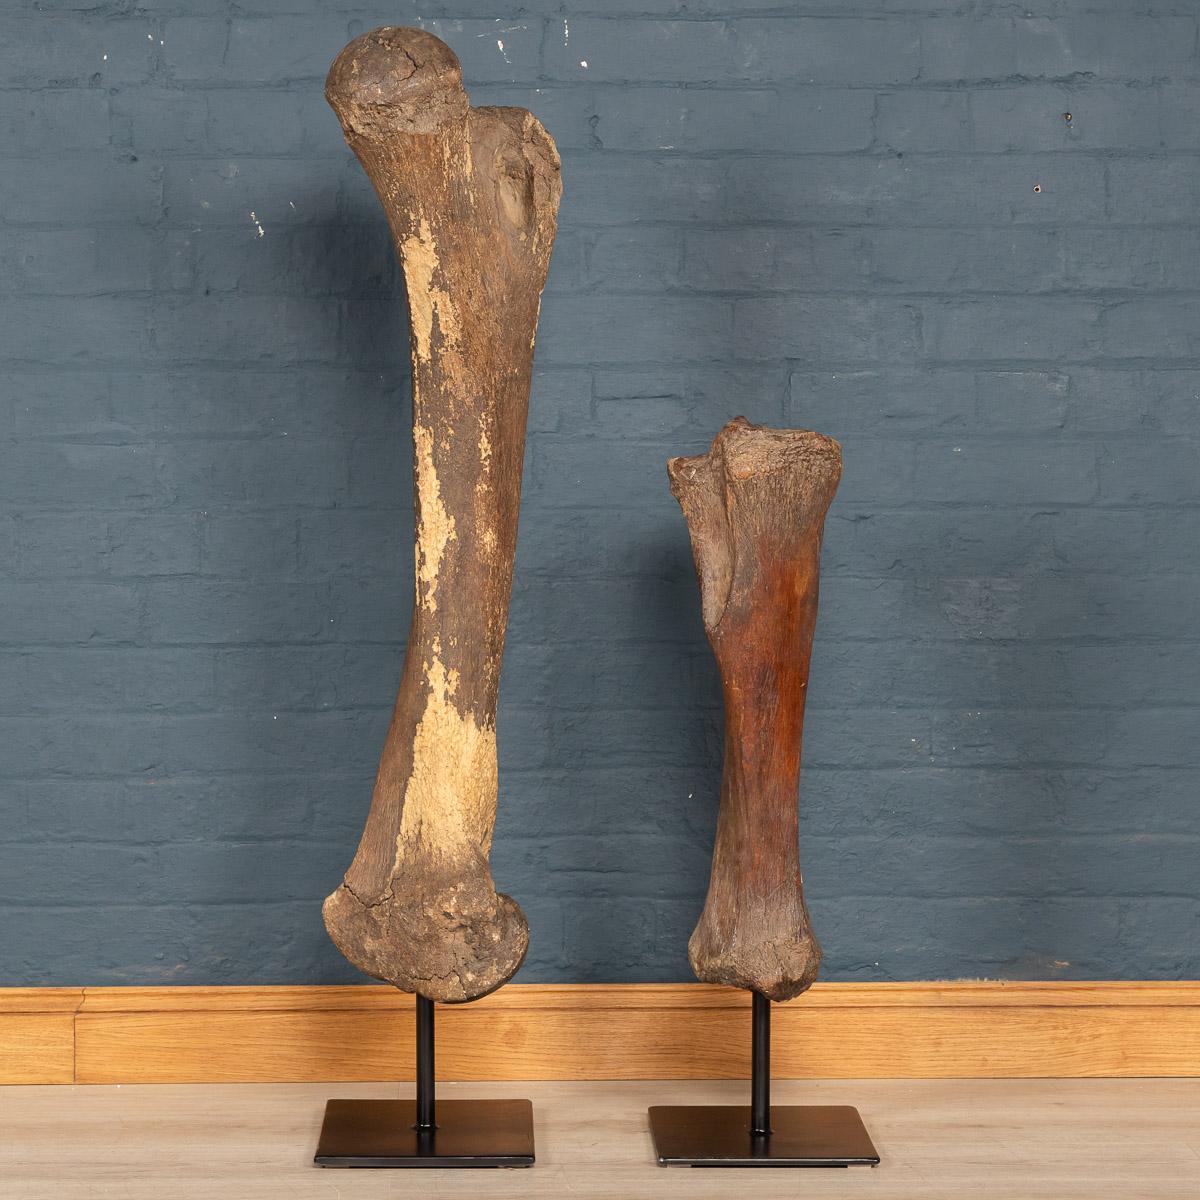 Dating to the pleistocene era (between 12,000 and 2.5 million years ago), this top quality Siberian woolly mammoth femur and tibia bones (Mammuthus primigenius) is in great condition. Partially fossilised in was unearthed in Yakutia (Siberia). This